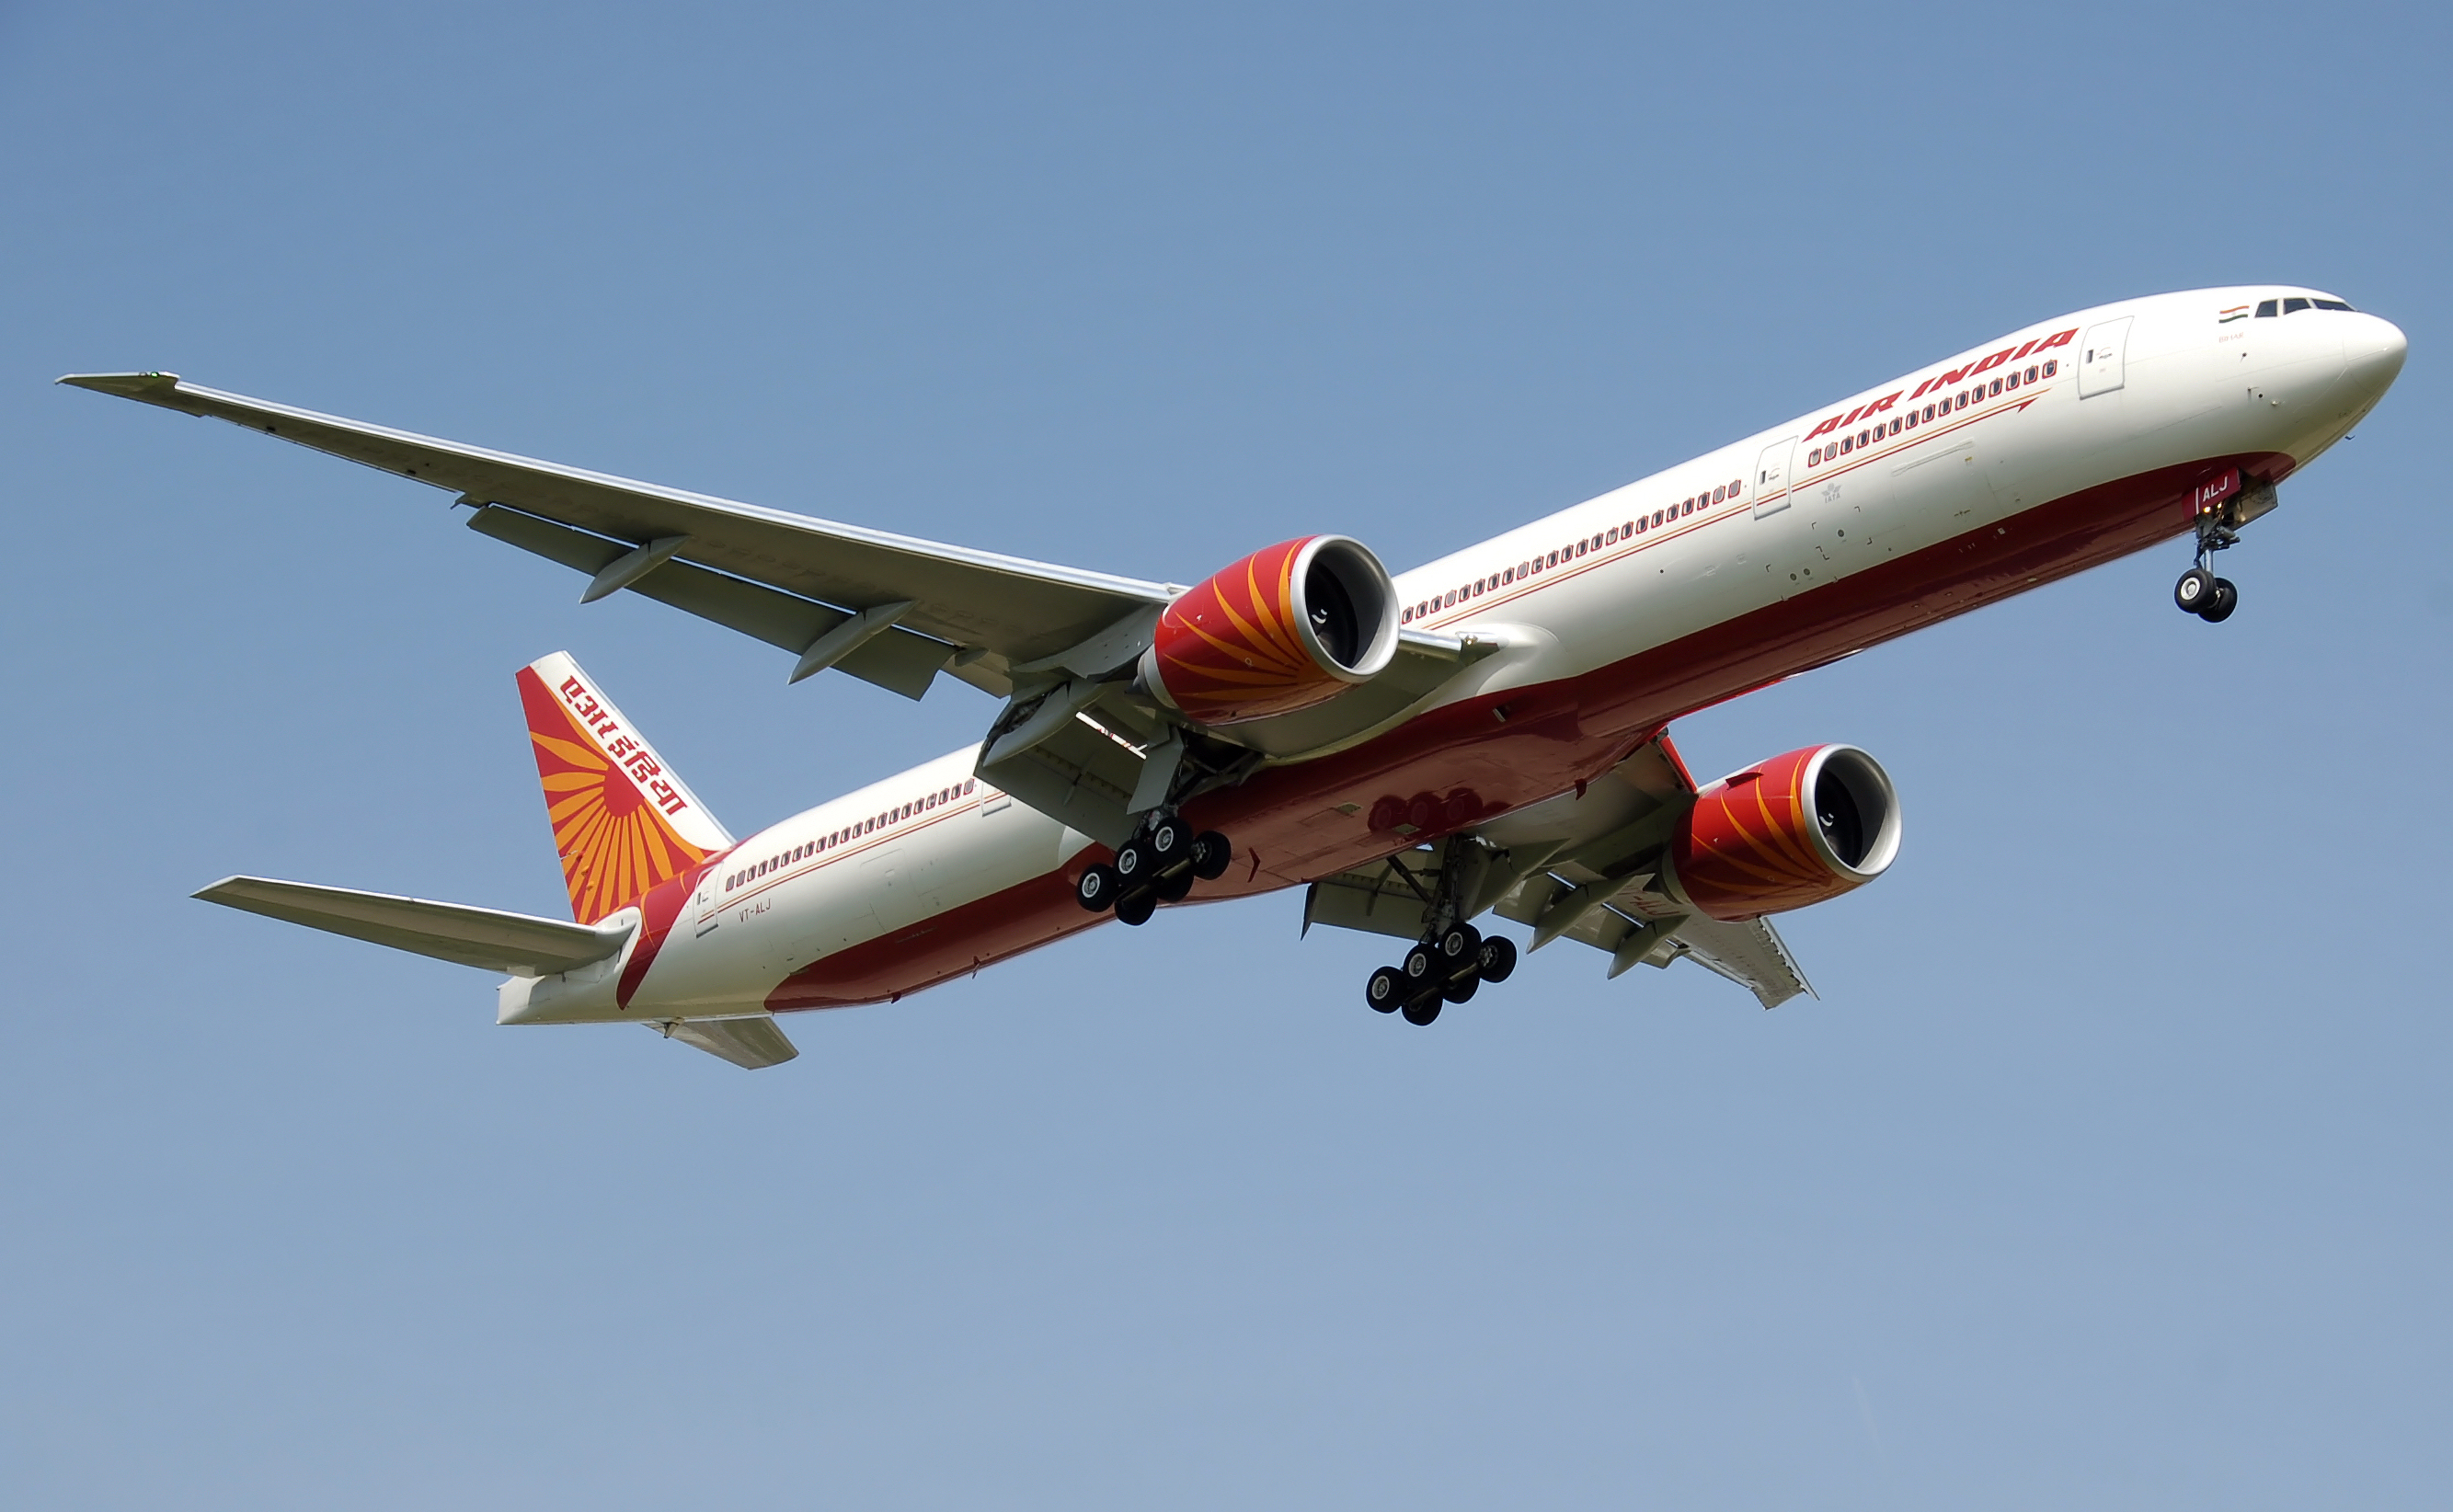 Air India Flight Grounded After Rats Discovered Aboard Plane